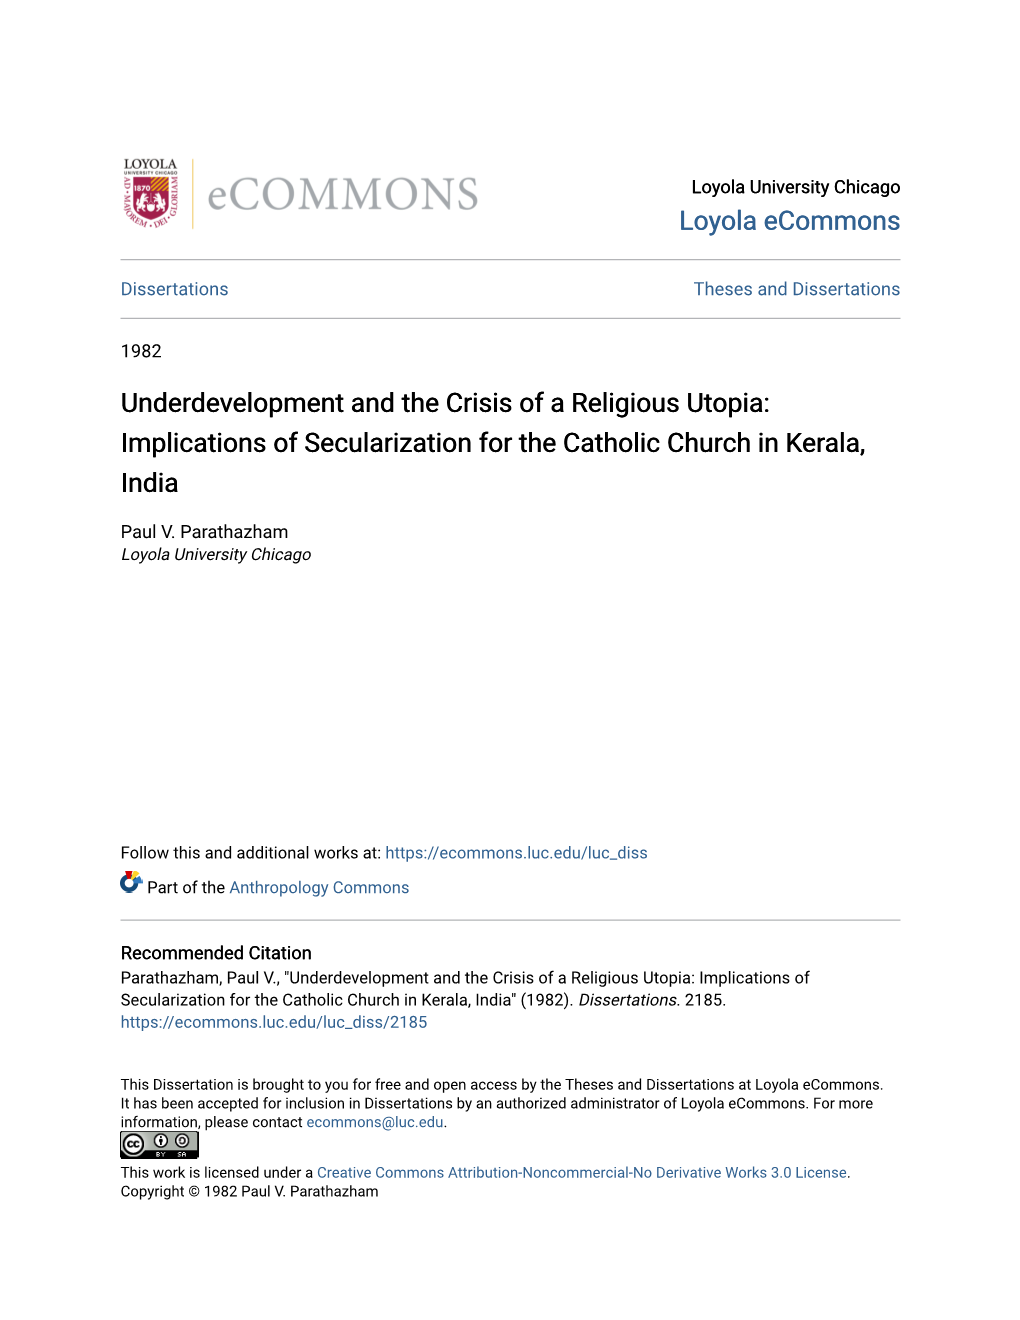 Implications of Secularization for the Catholic Church in Kerala, India